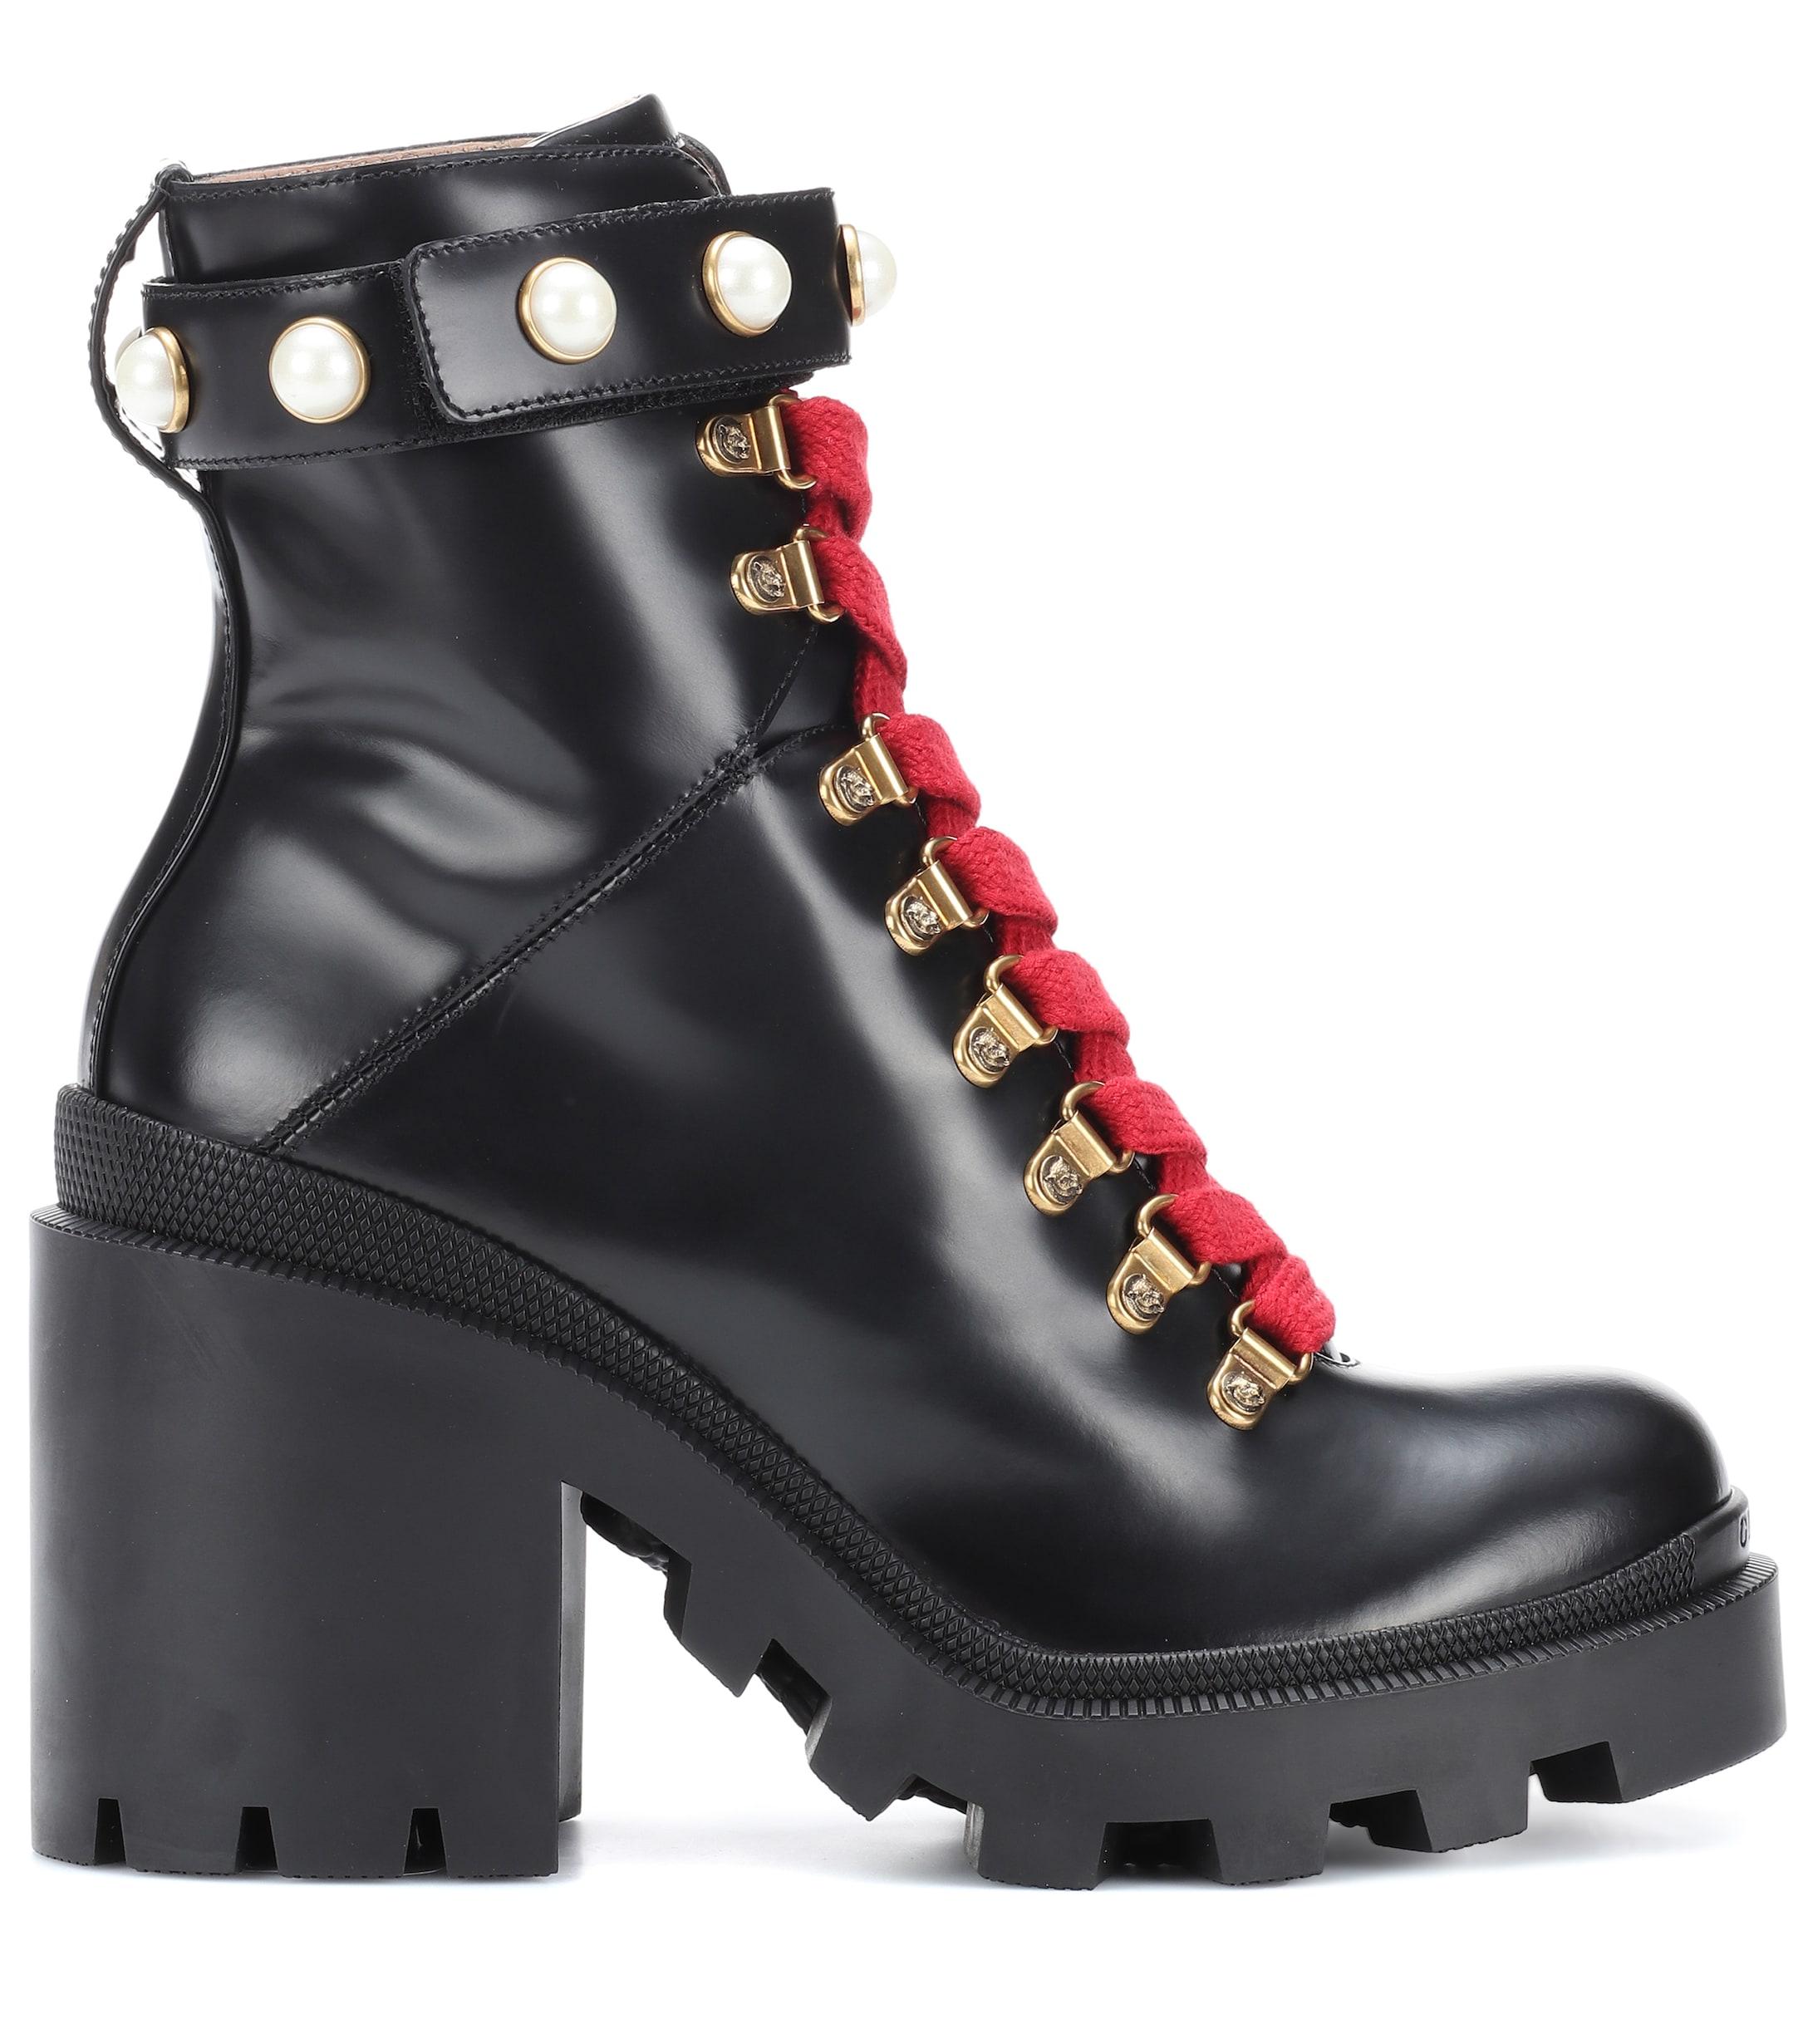 gucci leather combat boot